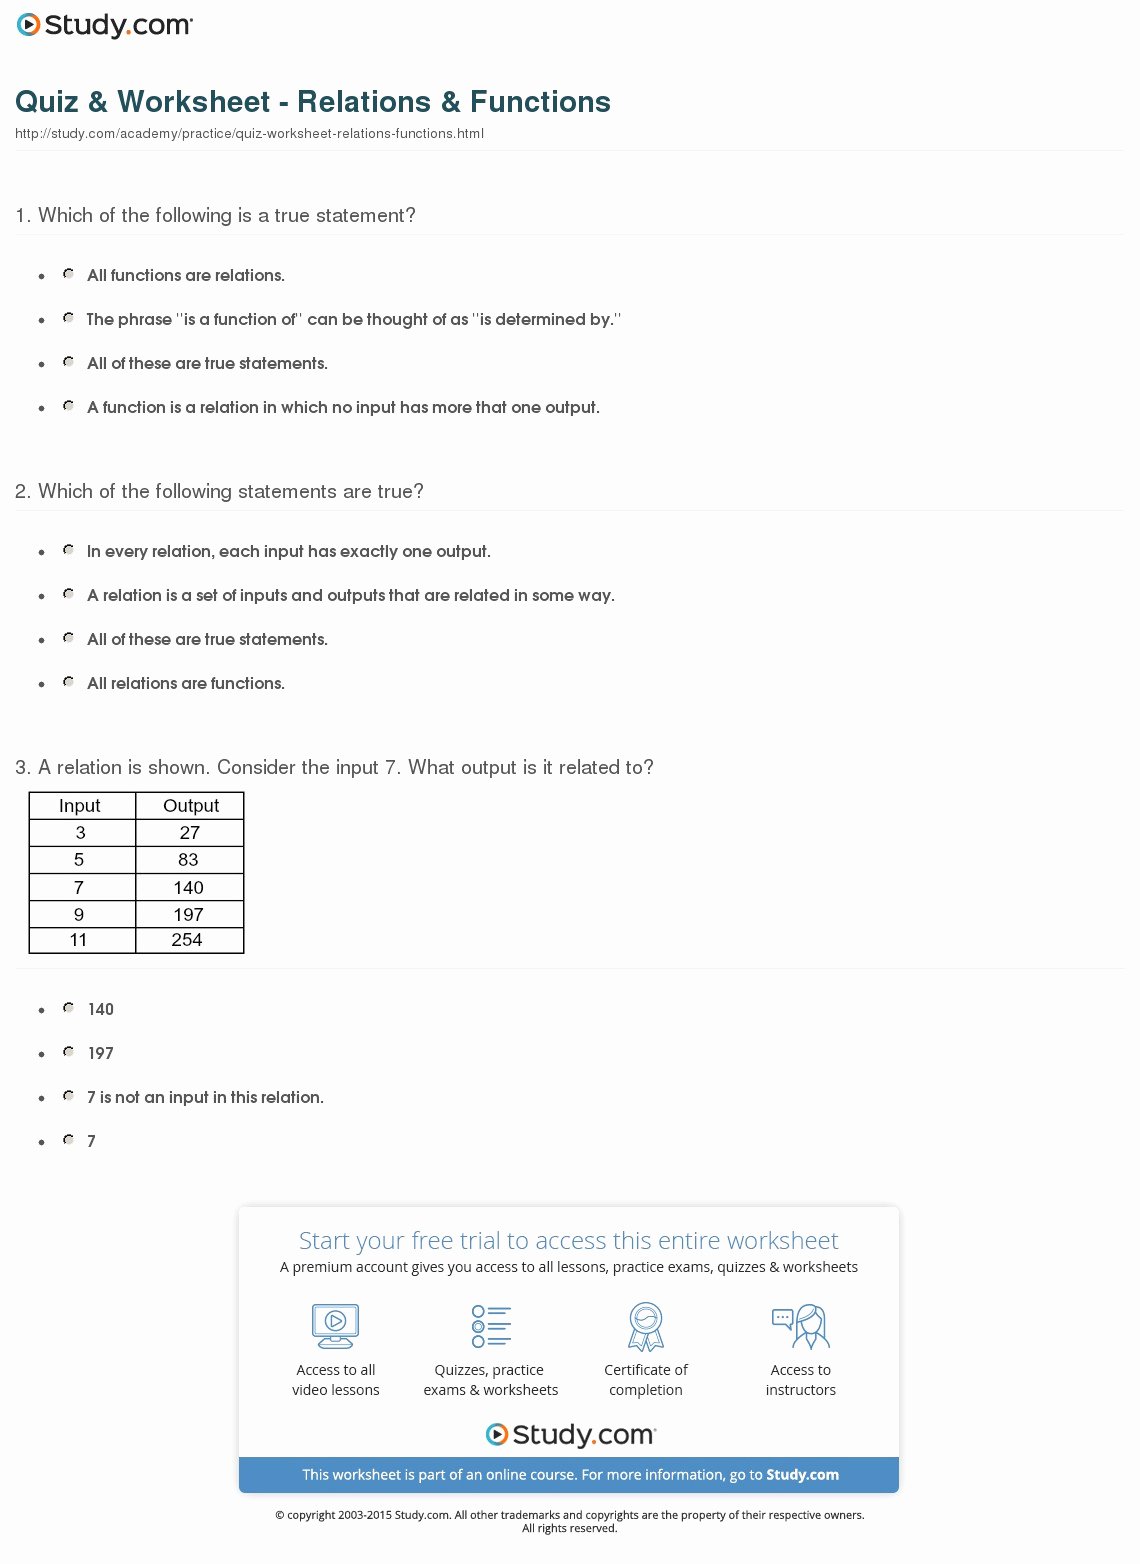 Relations and Functions Worksheet New Quiz &amp; Worksheet Relations &amp; Functions